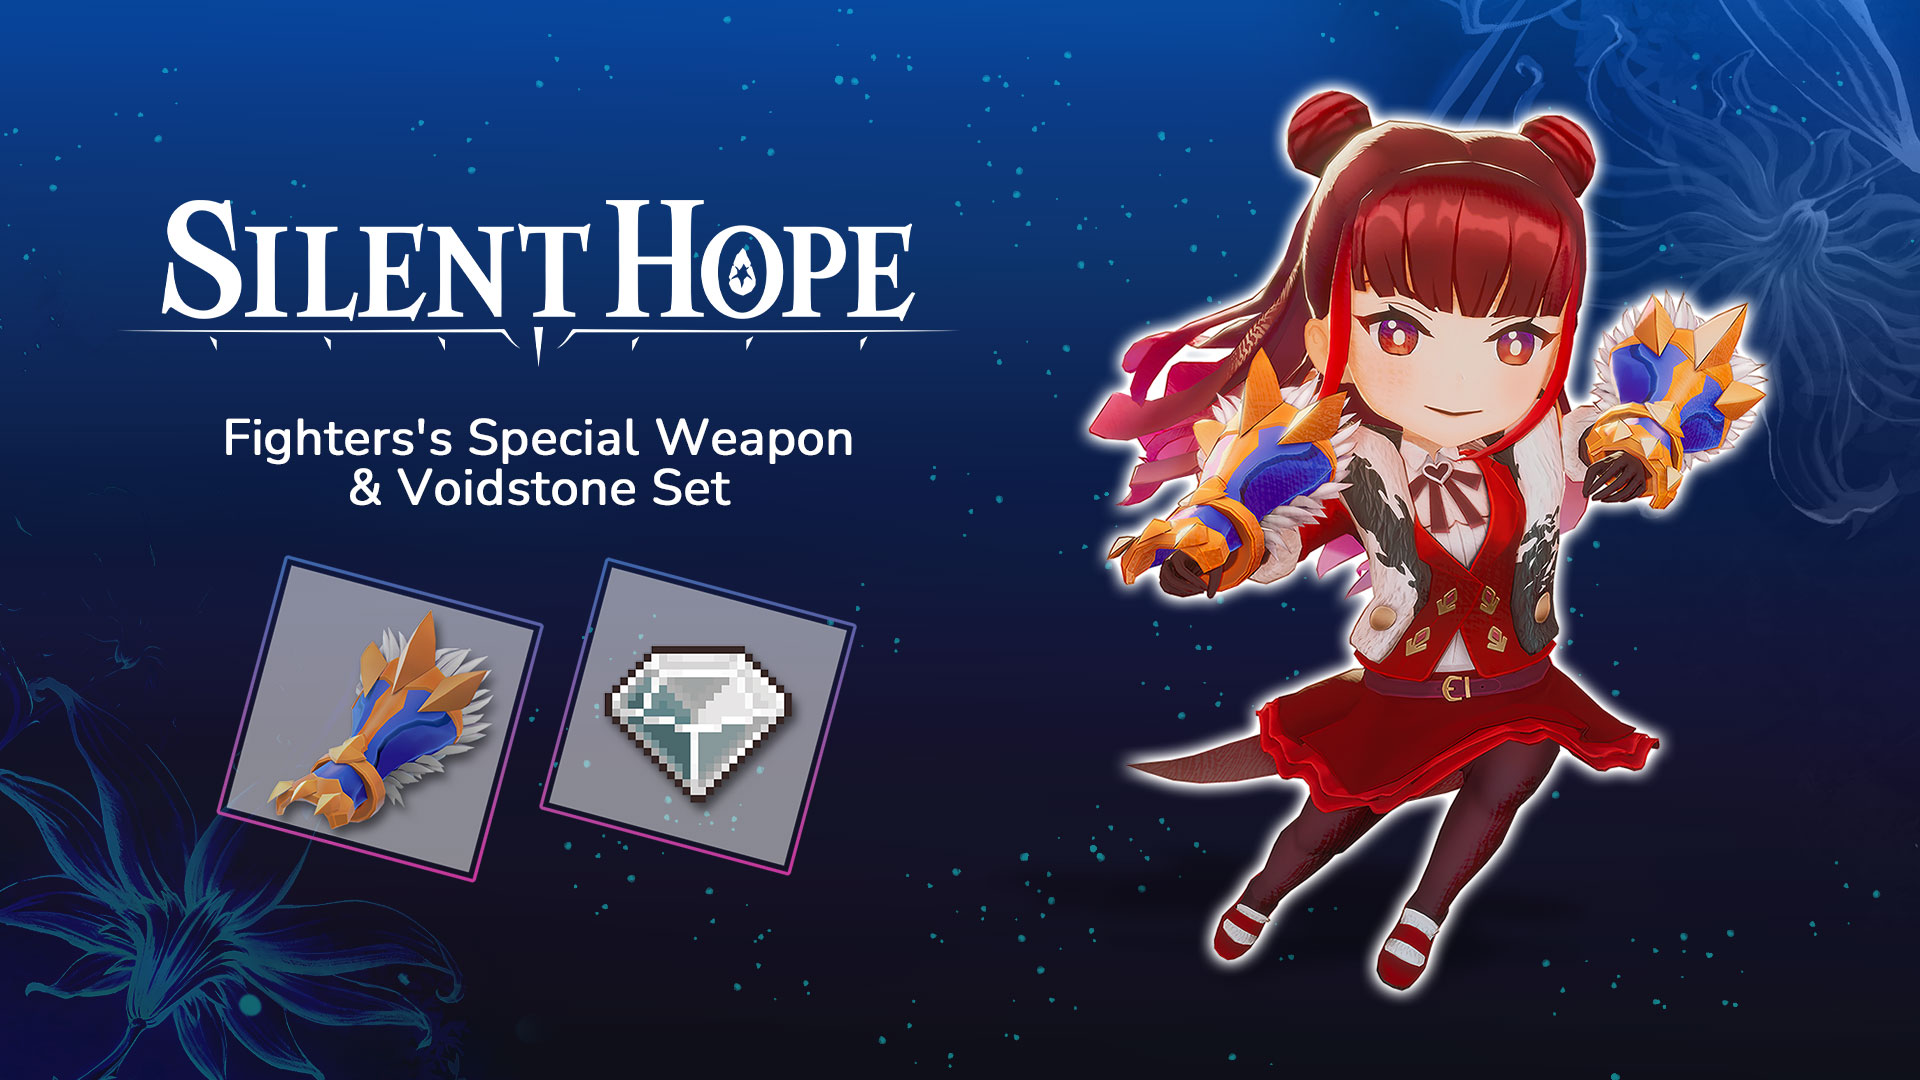 Fighter's Special Weapon & Voidstone Set